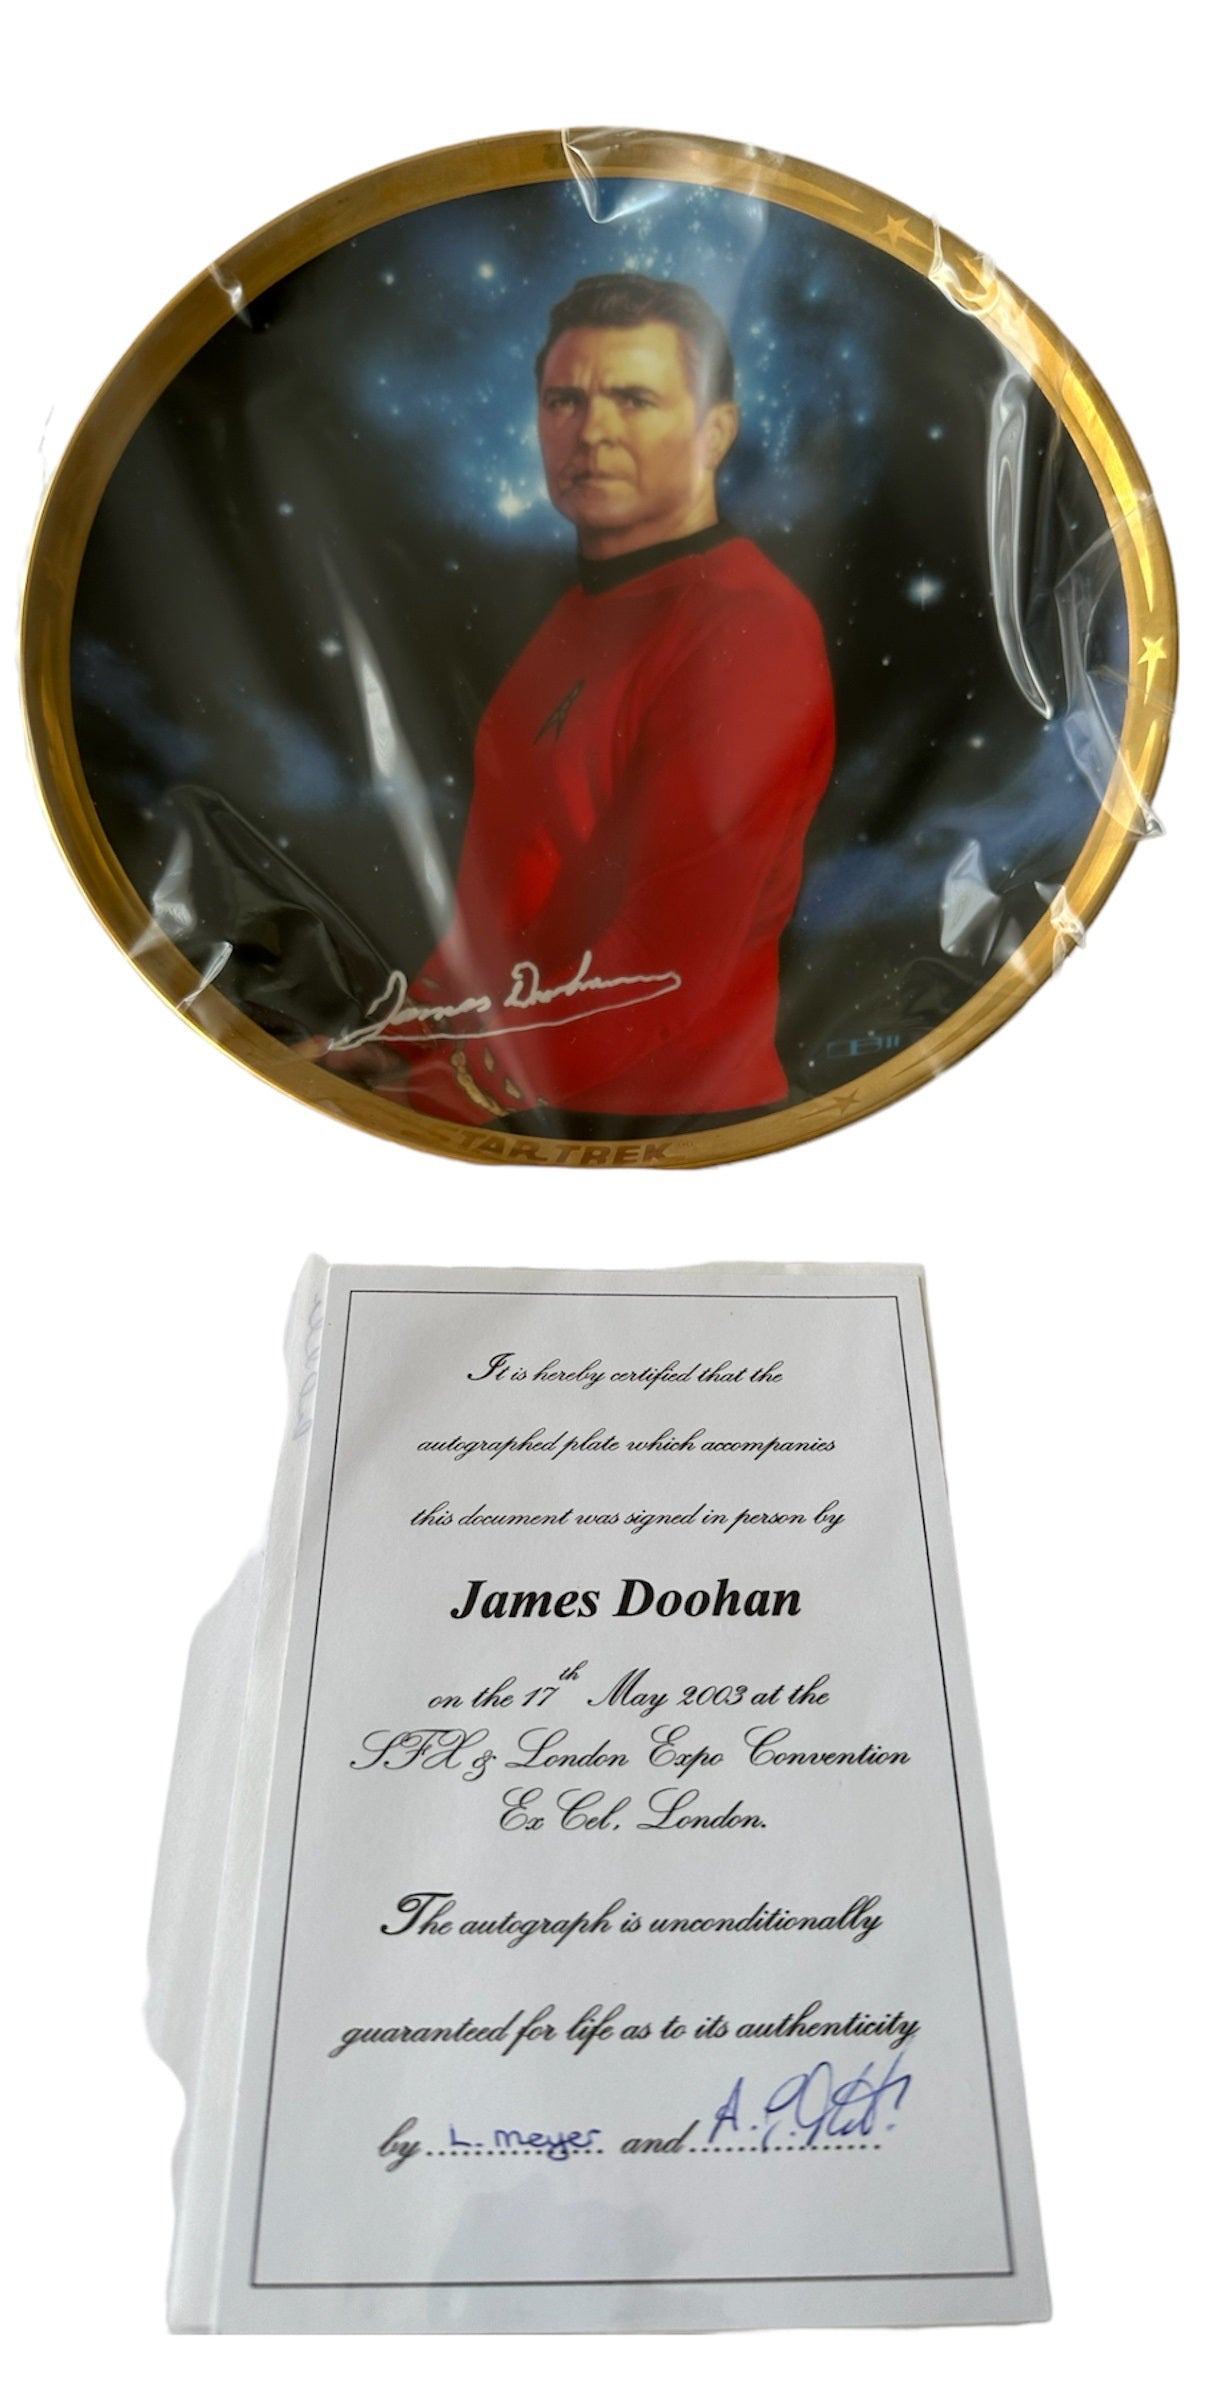 Vintage 1991 Star Trek The Original Series Scotty 25th Anniversary Commemorative Plate - Personally Signed Autographed By James Doohan With COA - Ultra Rare